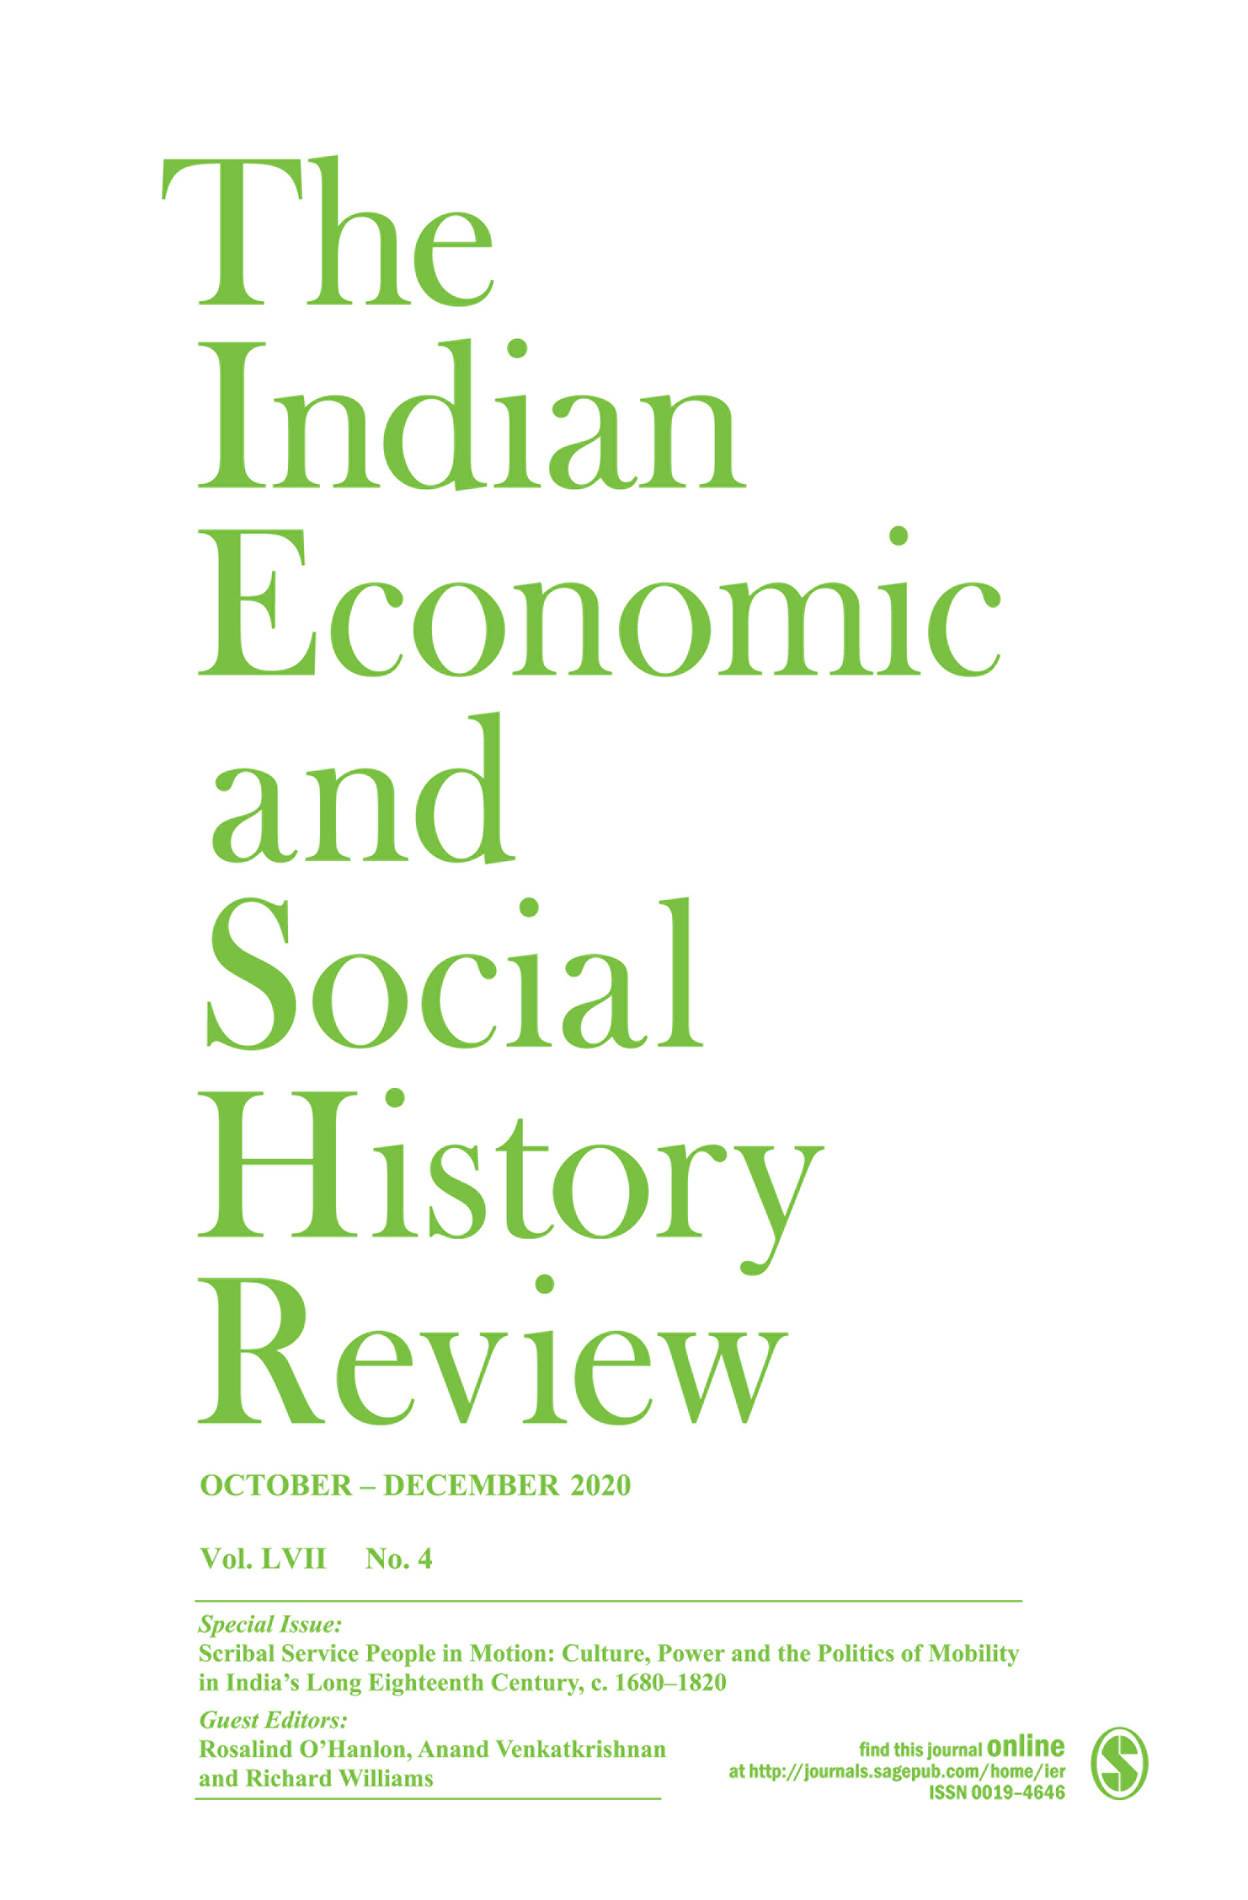 The Indian Economic and Social History Review